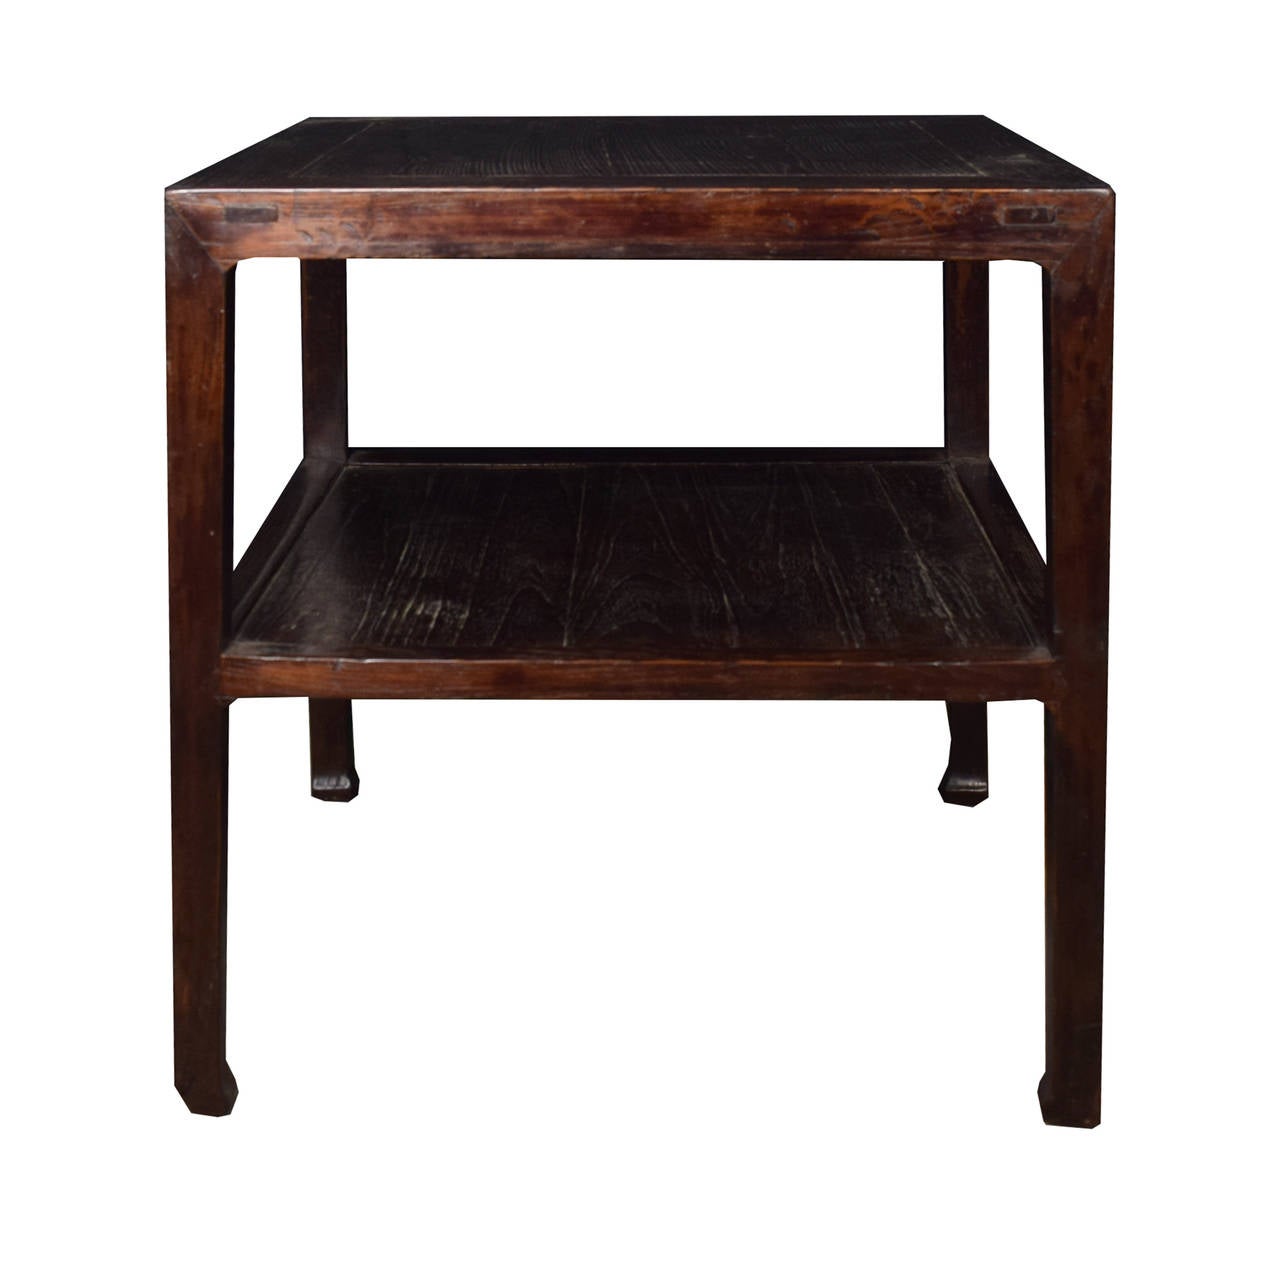 Qing 19th Century Chinese Square Table with Hoof Feet and Shelf